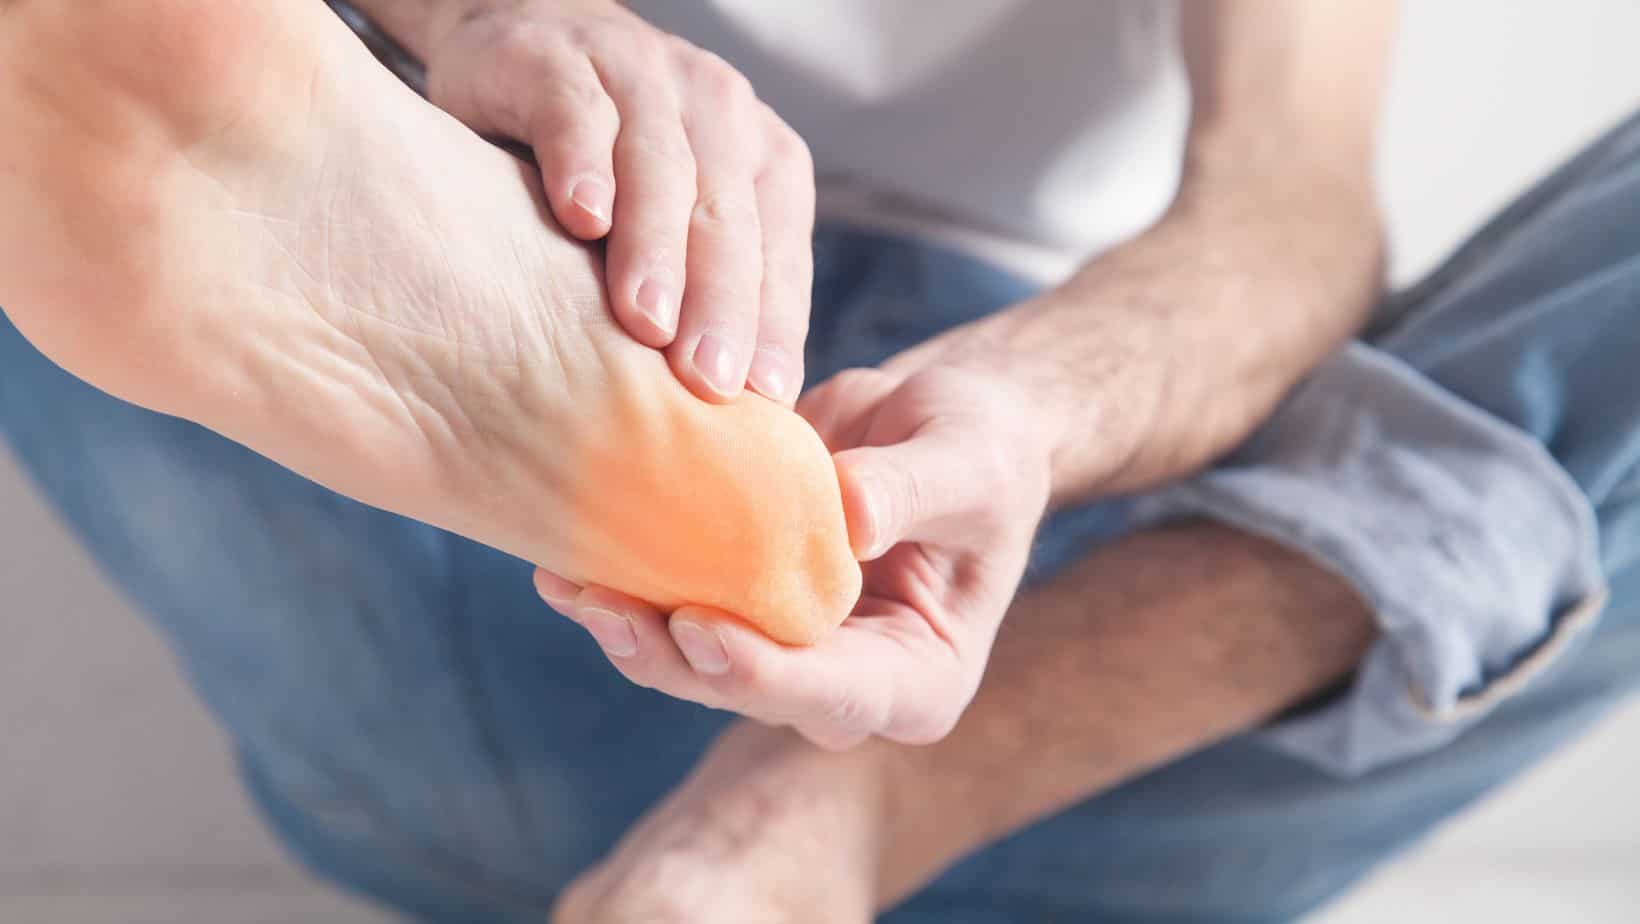 4 Heel Pain Symptoms to Take Seriously: Chicagoland Foot and Ankle: Board  Certified Foot and Ankle Specialists and Surgeons